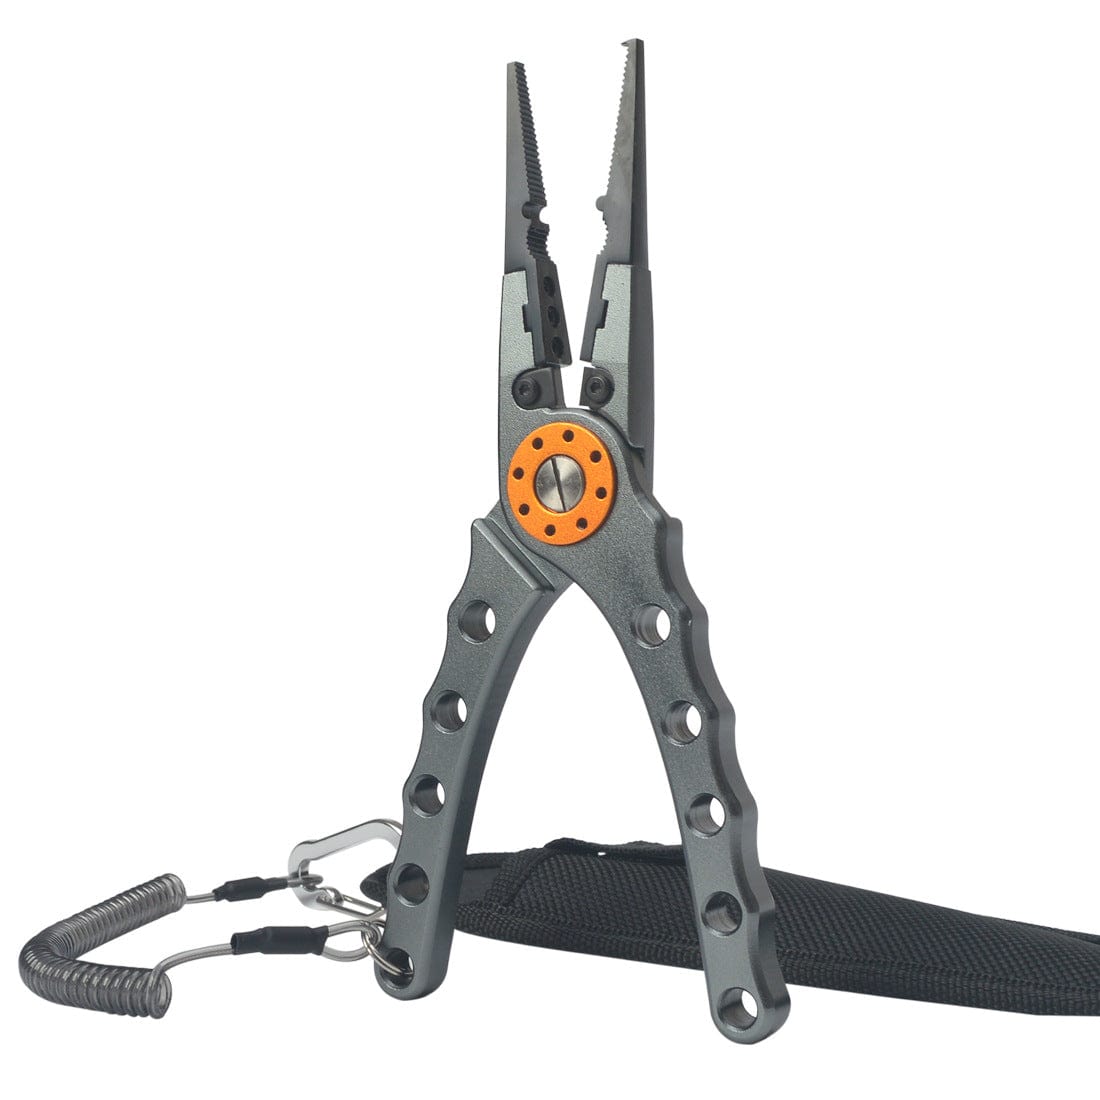 High-Quality Aluminum Alloy Fishing Pliers with EZ Line Cutter